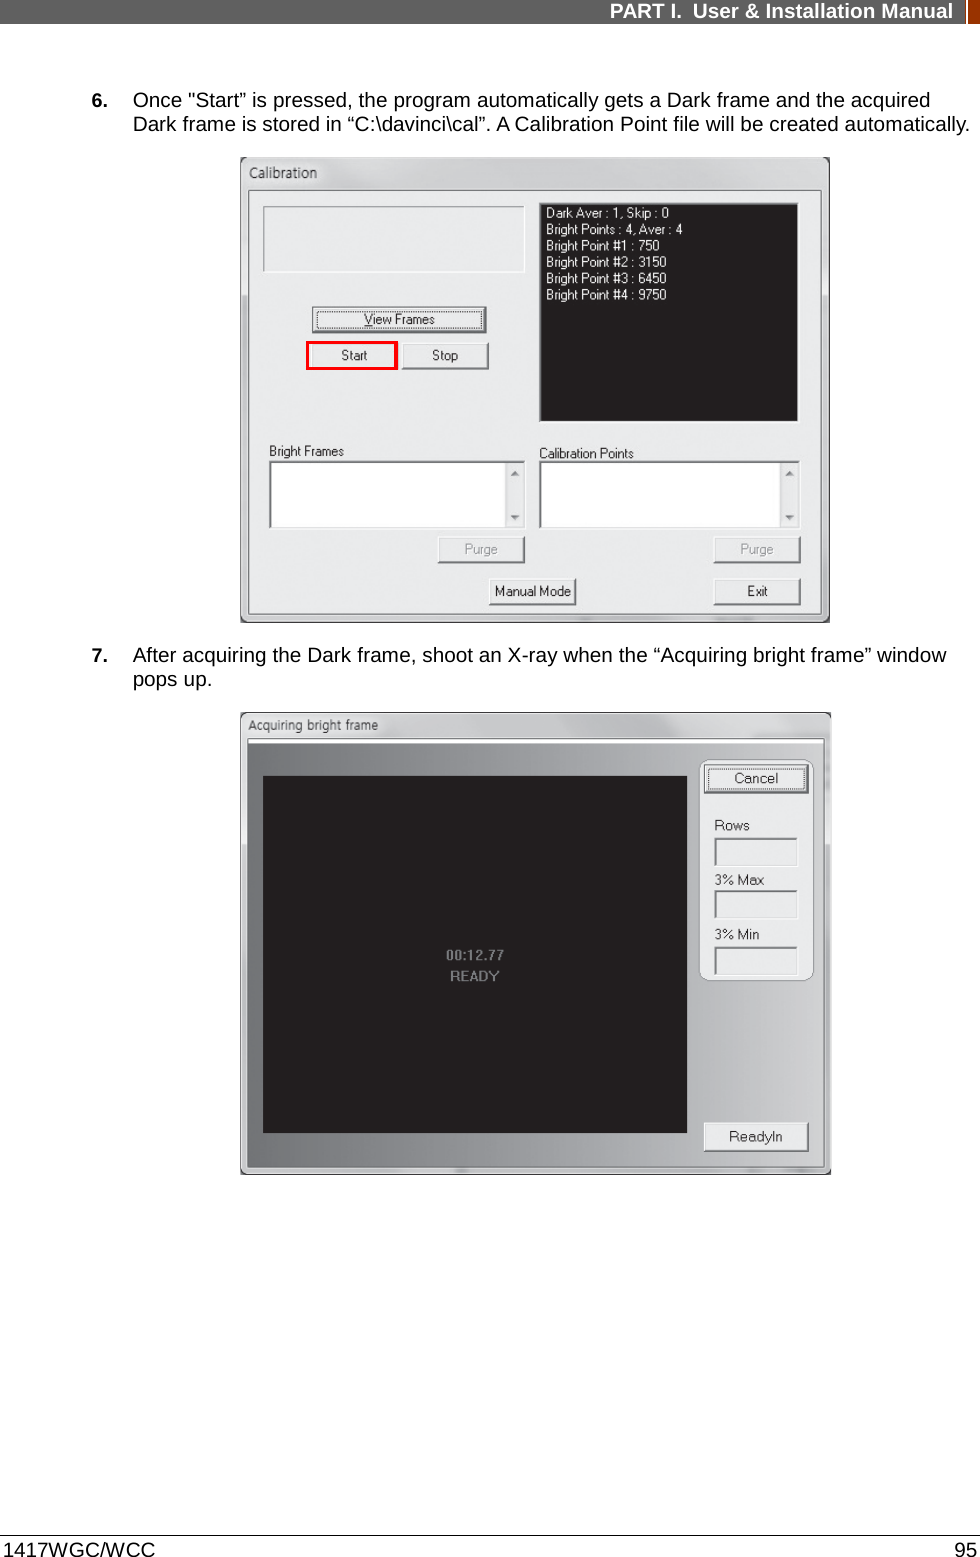 PART I. User &amp; Installation Manual  1417WGC/WCC 95 6. Once &quot;Start” is pressed, the program automatically gets a Dark frame and the acquired Dark frame is stored in “C:\davinci\cal”. A Calibration Point file will be created automatically.  7. After acquiring the Dark frame, shoot an X-ray when the “Acquiring bright frame” window pops up.         